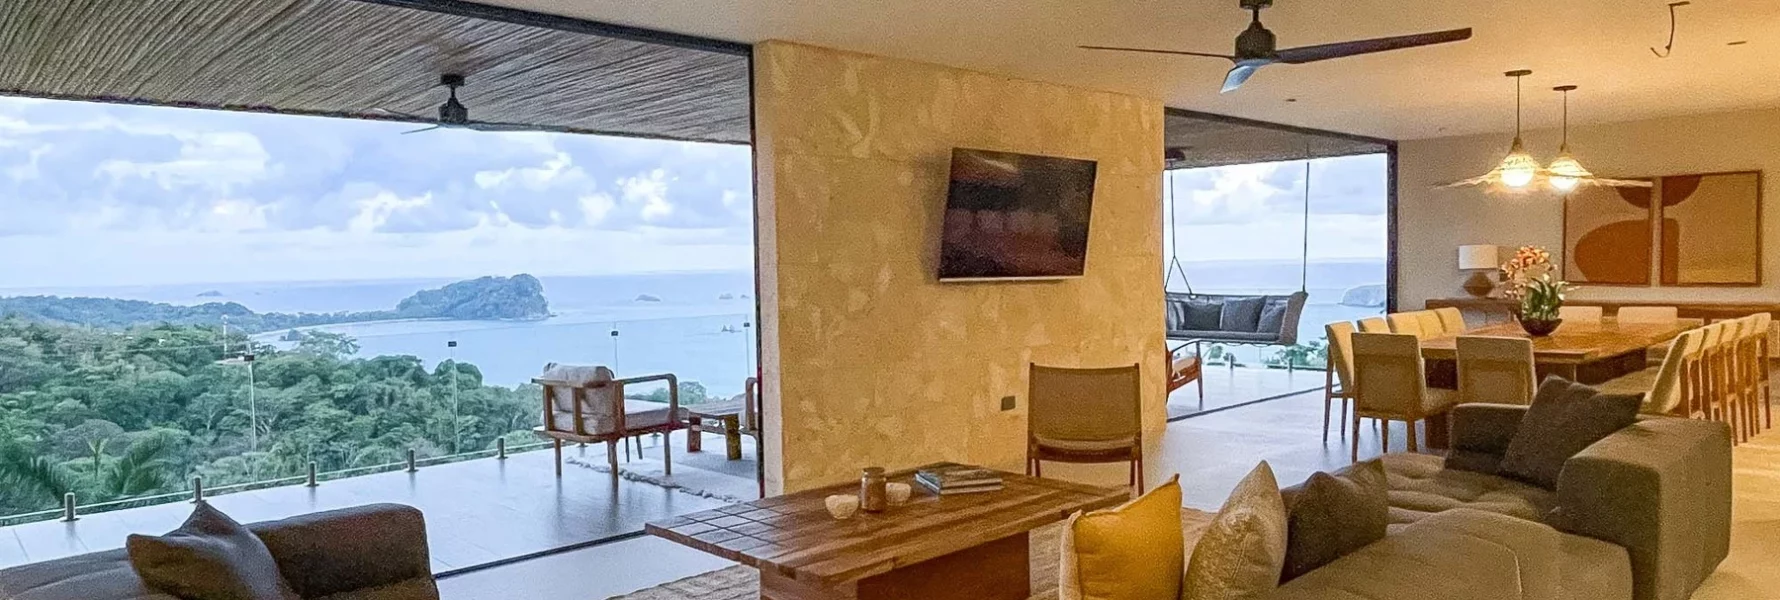 Enjoy spending time with your family in this luxury sitting area with an incredible ocean view.